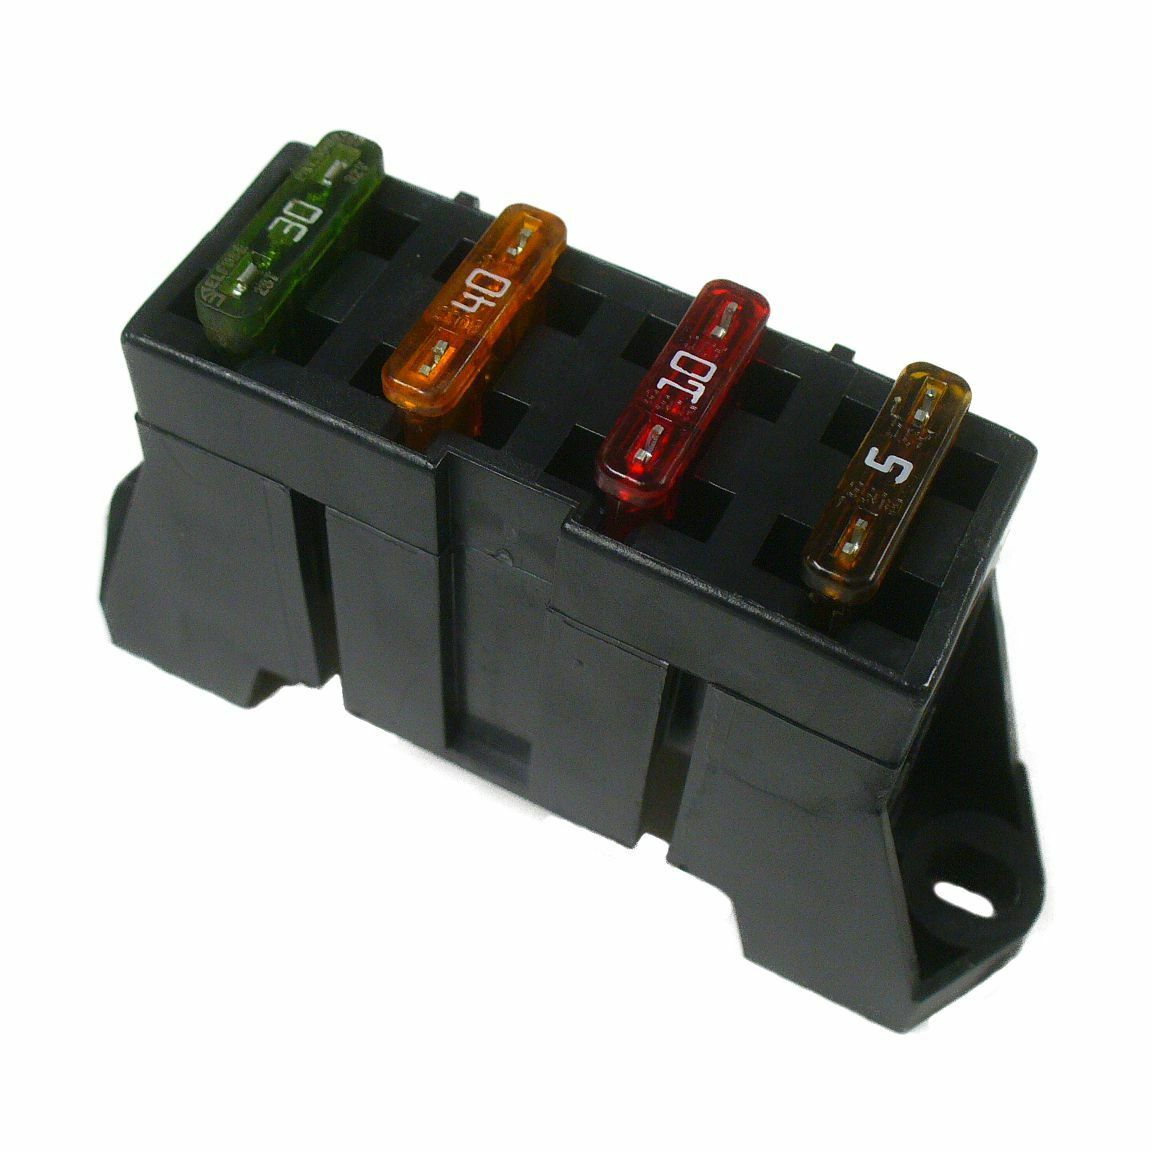 Delphi Ato Atc 4 Way Fuse Block Panel Holder With Terminals And Busbar 12v